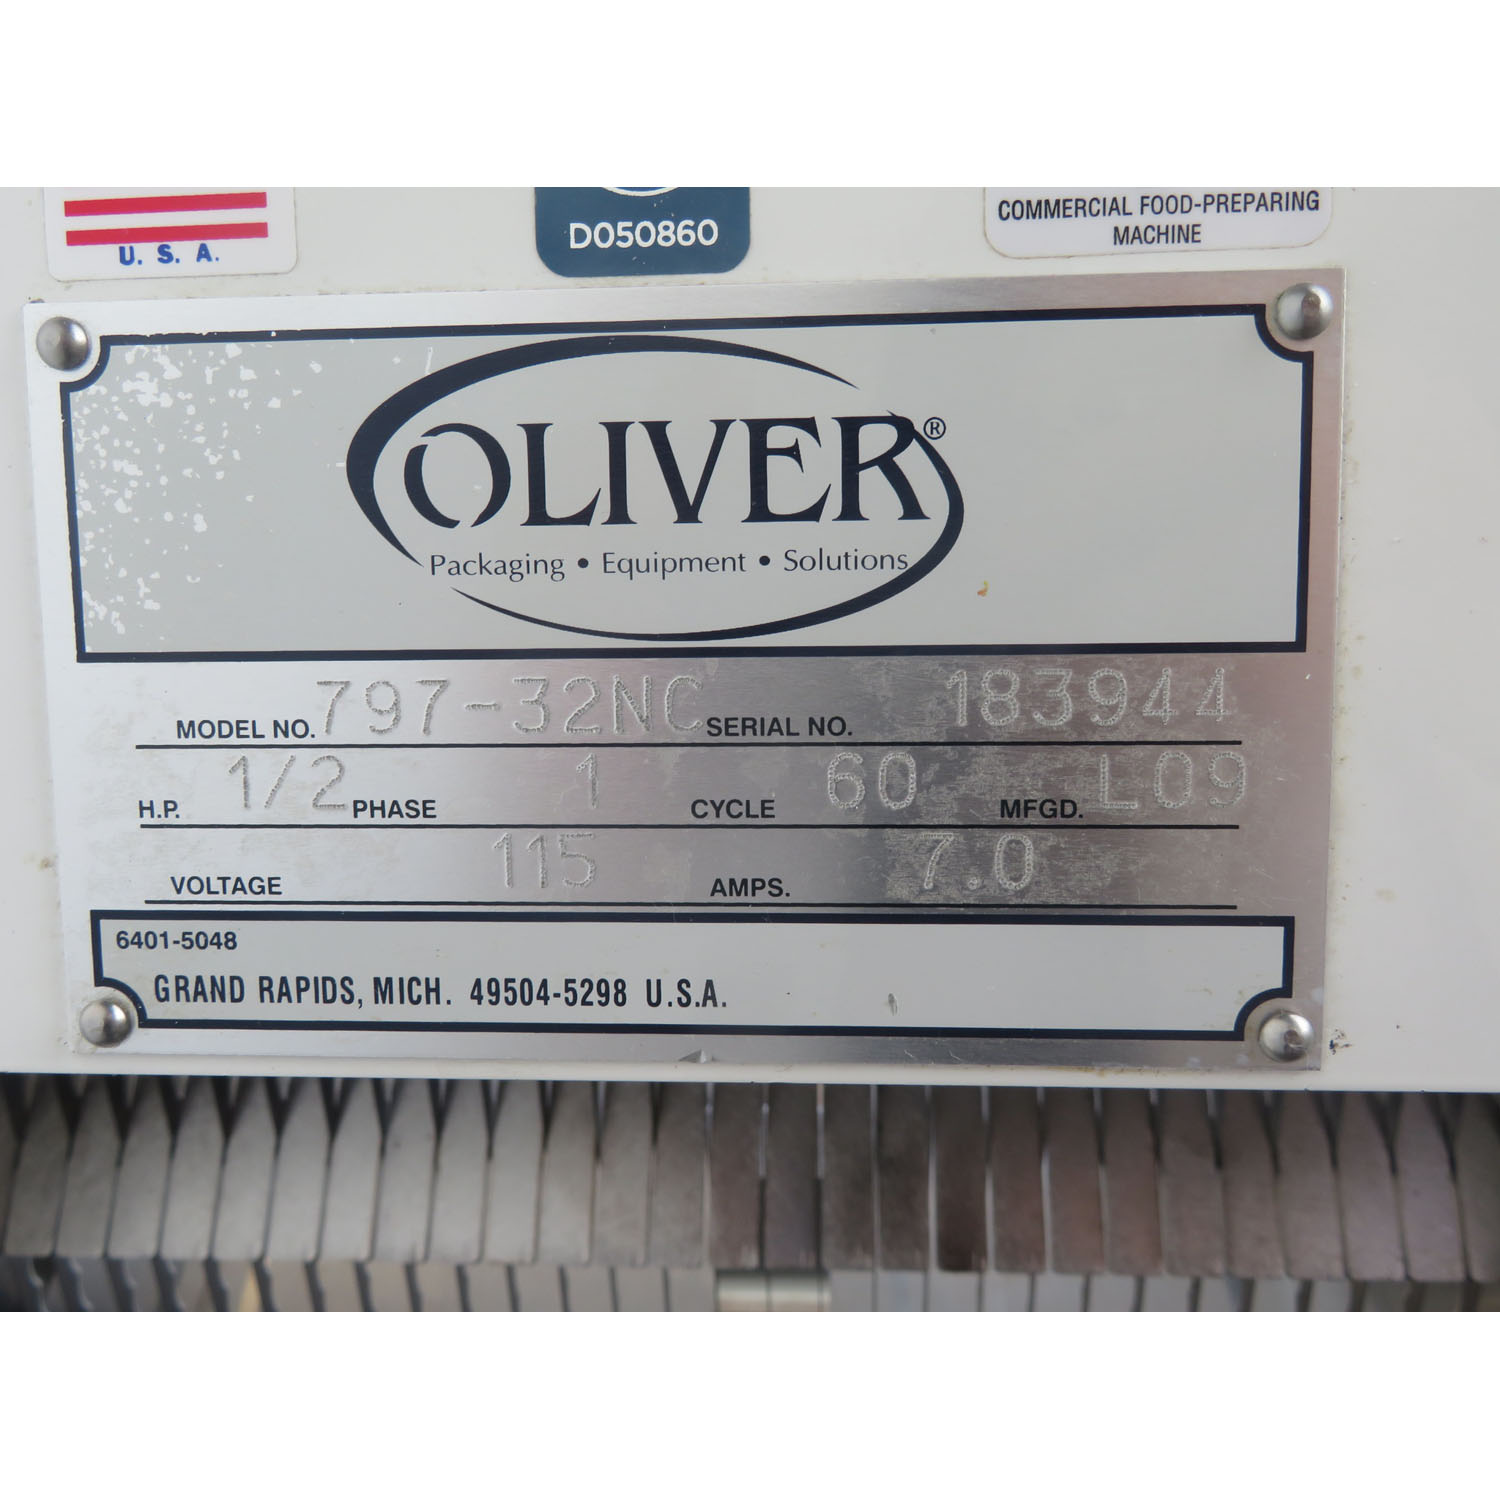 Oliver 797-32NC Bread Slicer 1/2" Cut, Used Great Condition image 4